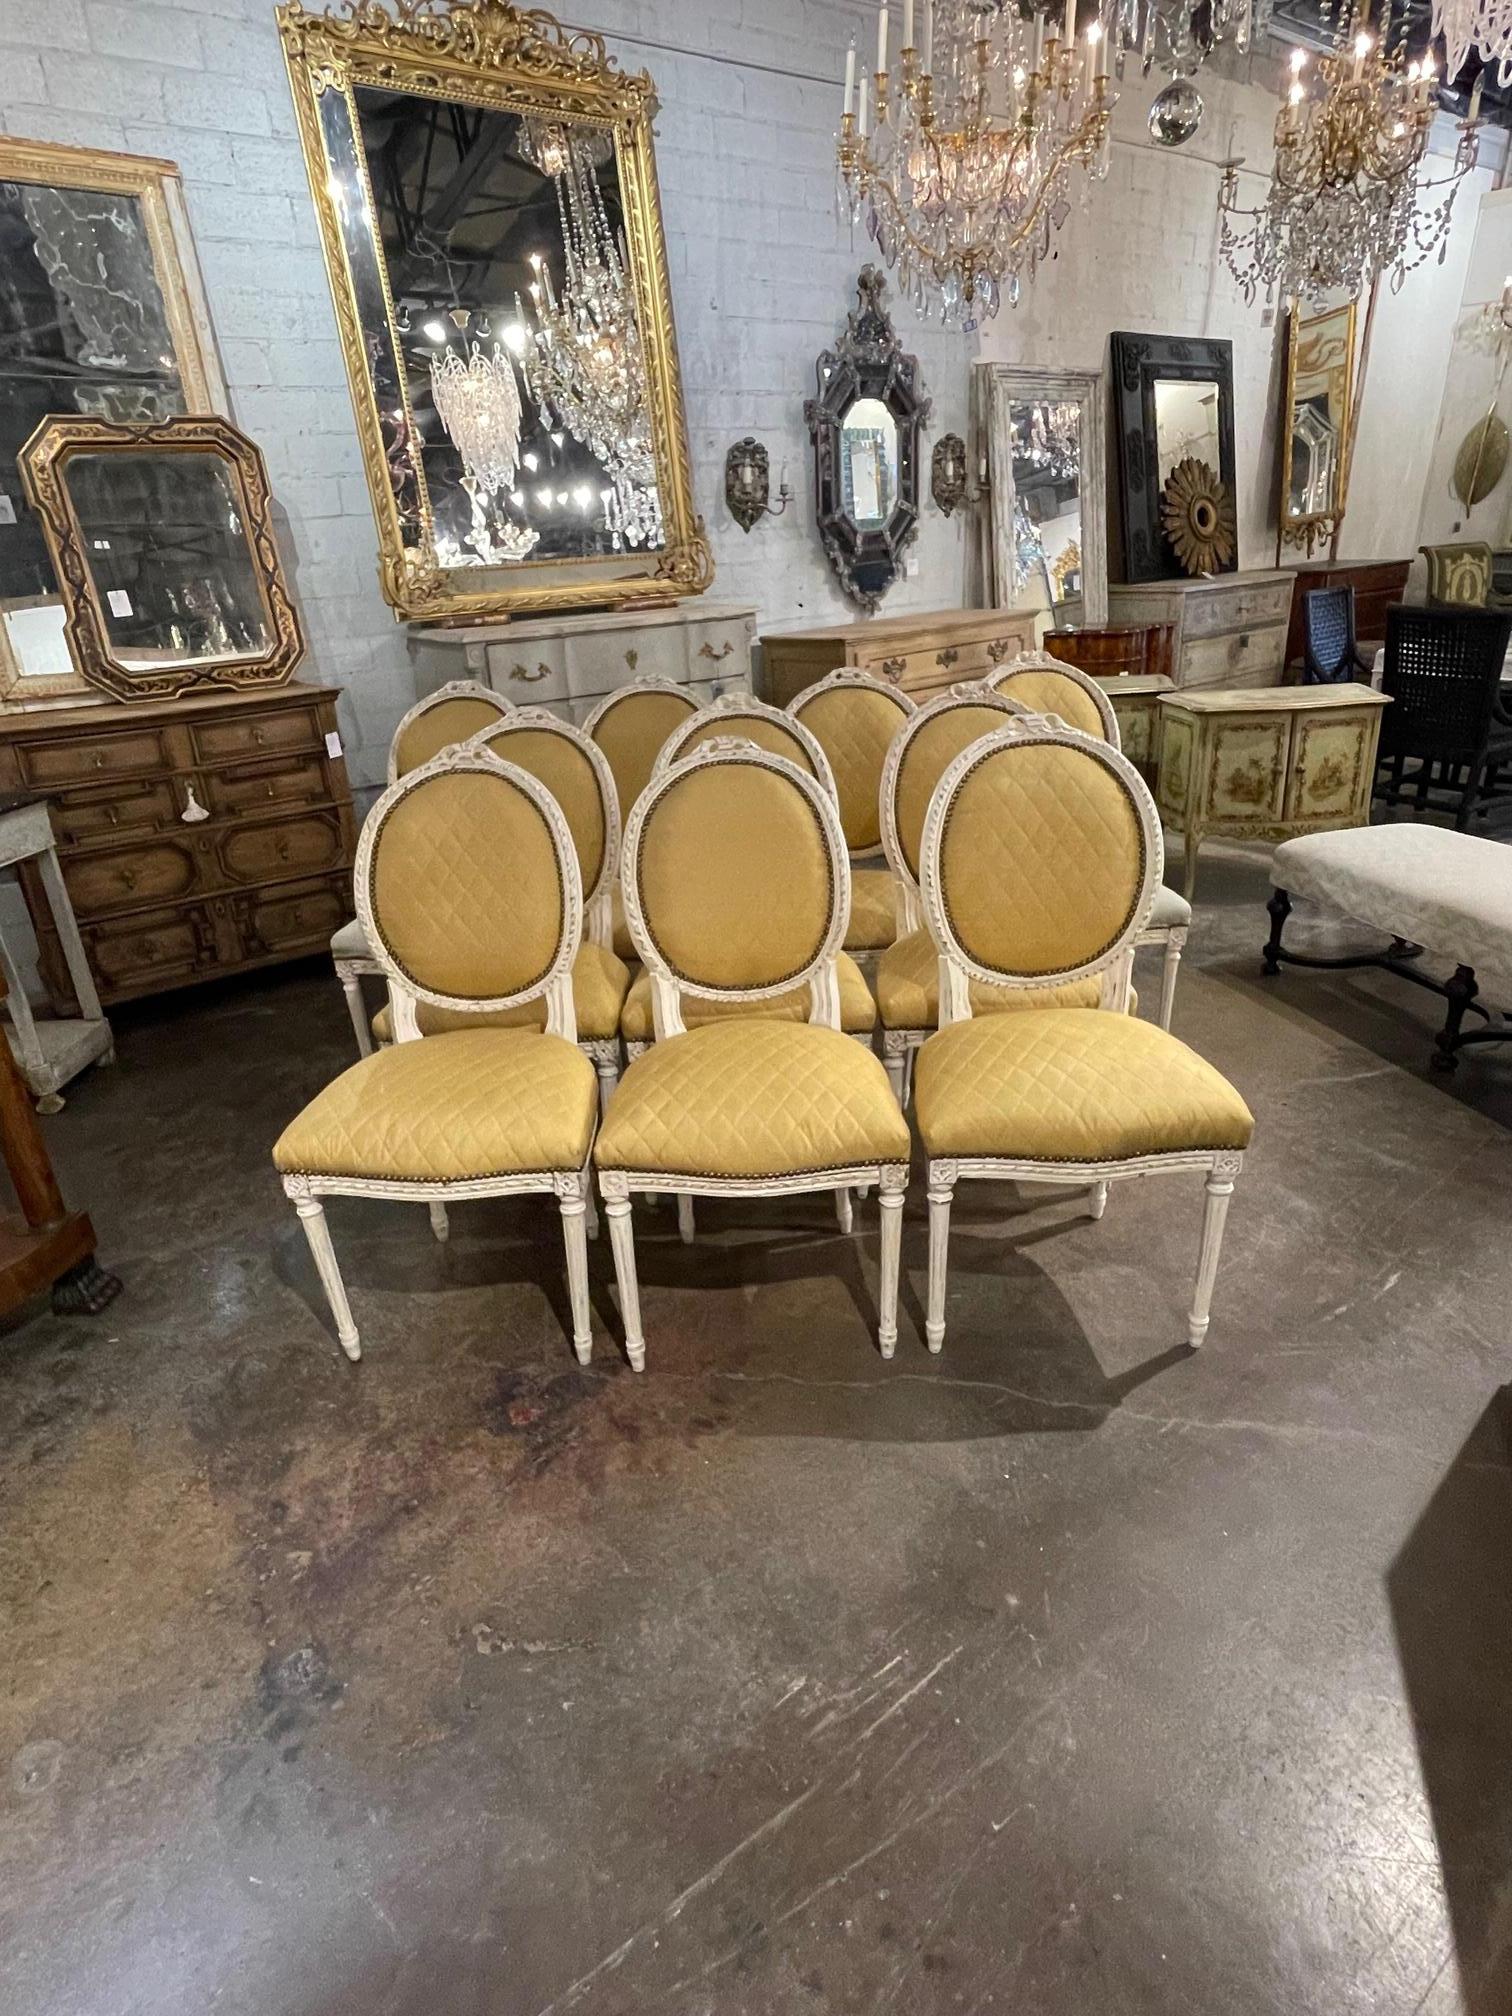 Exceptional set of 10 French Louis XVI carved and painted dining chairs attributed to Jansen. Very nice carvings and pretty white washed finish on the wood. They are upholstered in a gold fabric. A fine set!
Note: Two of the chairs are missing